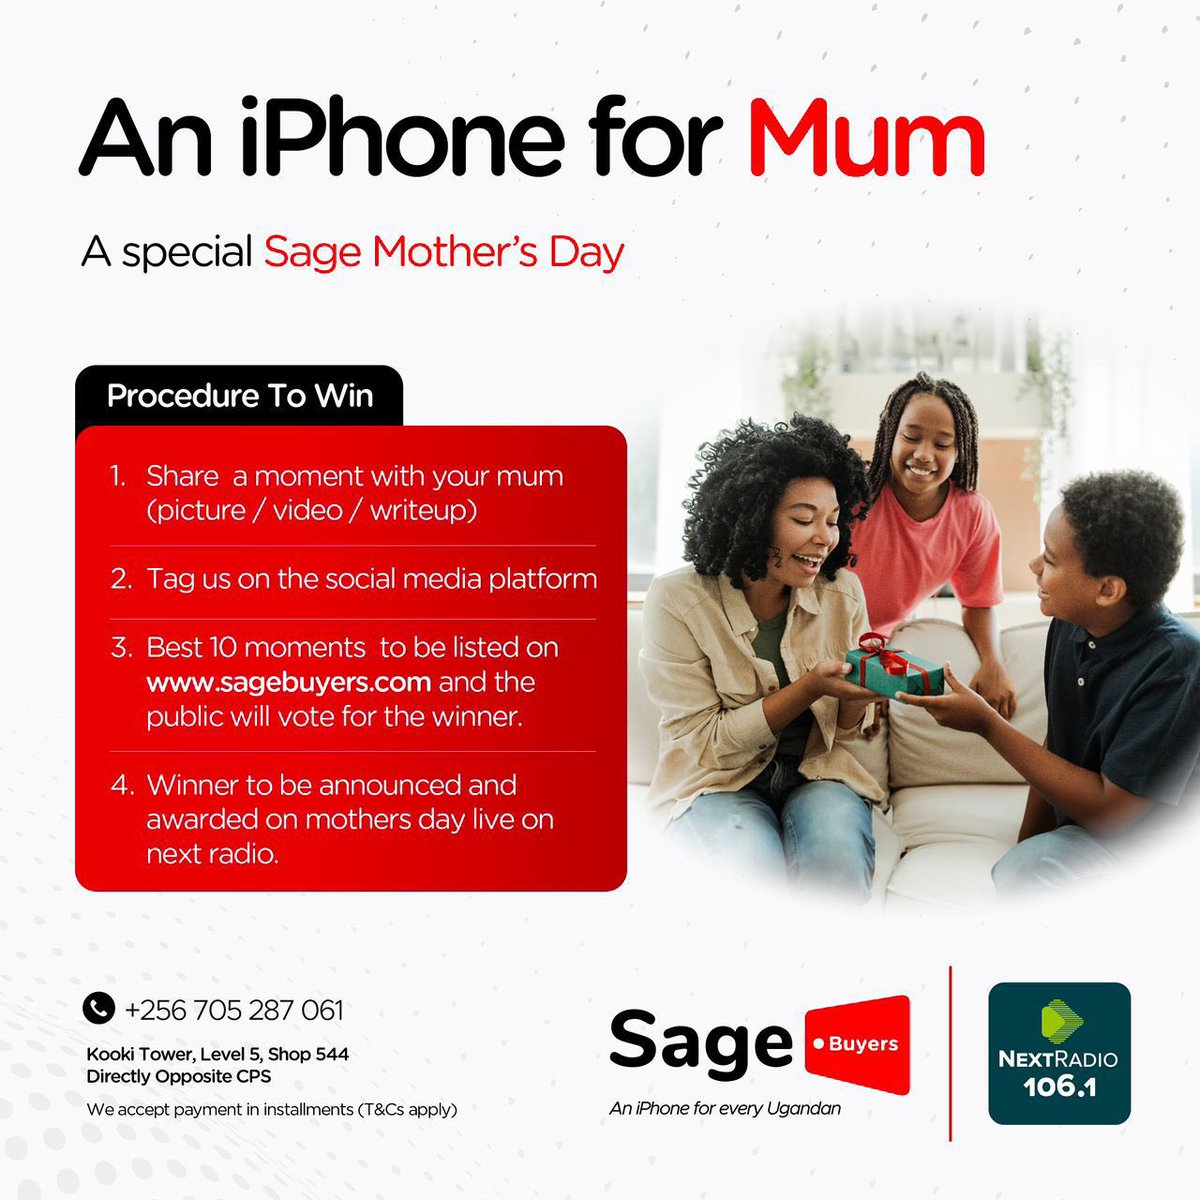 iPhone 15 price when you buy from sagebuyers.com: UGX 3,600,000 

iPhone 15 price when you participate in the #SageMothersDay giveaway: UGX 0